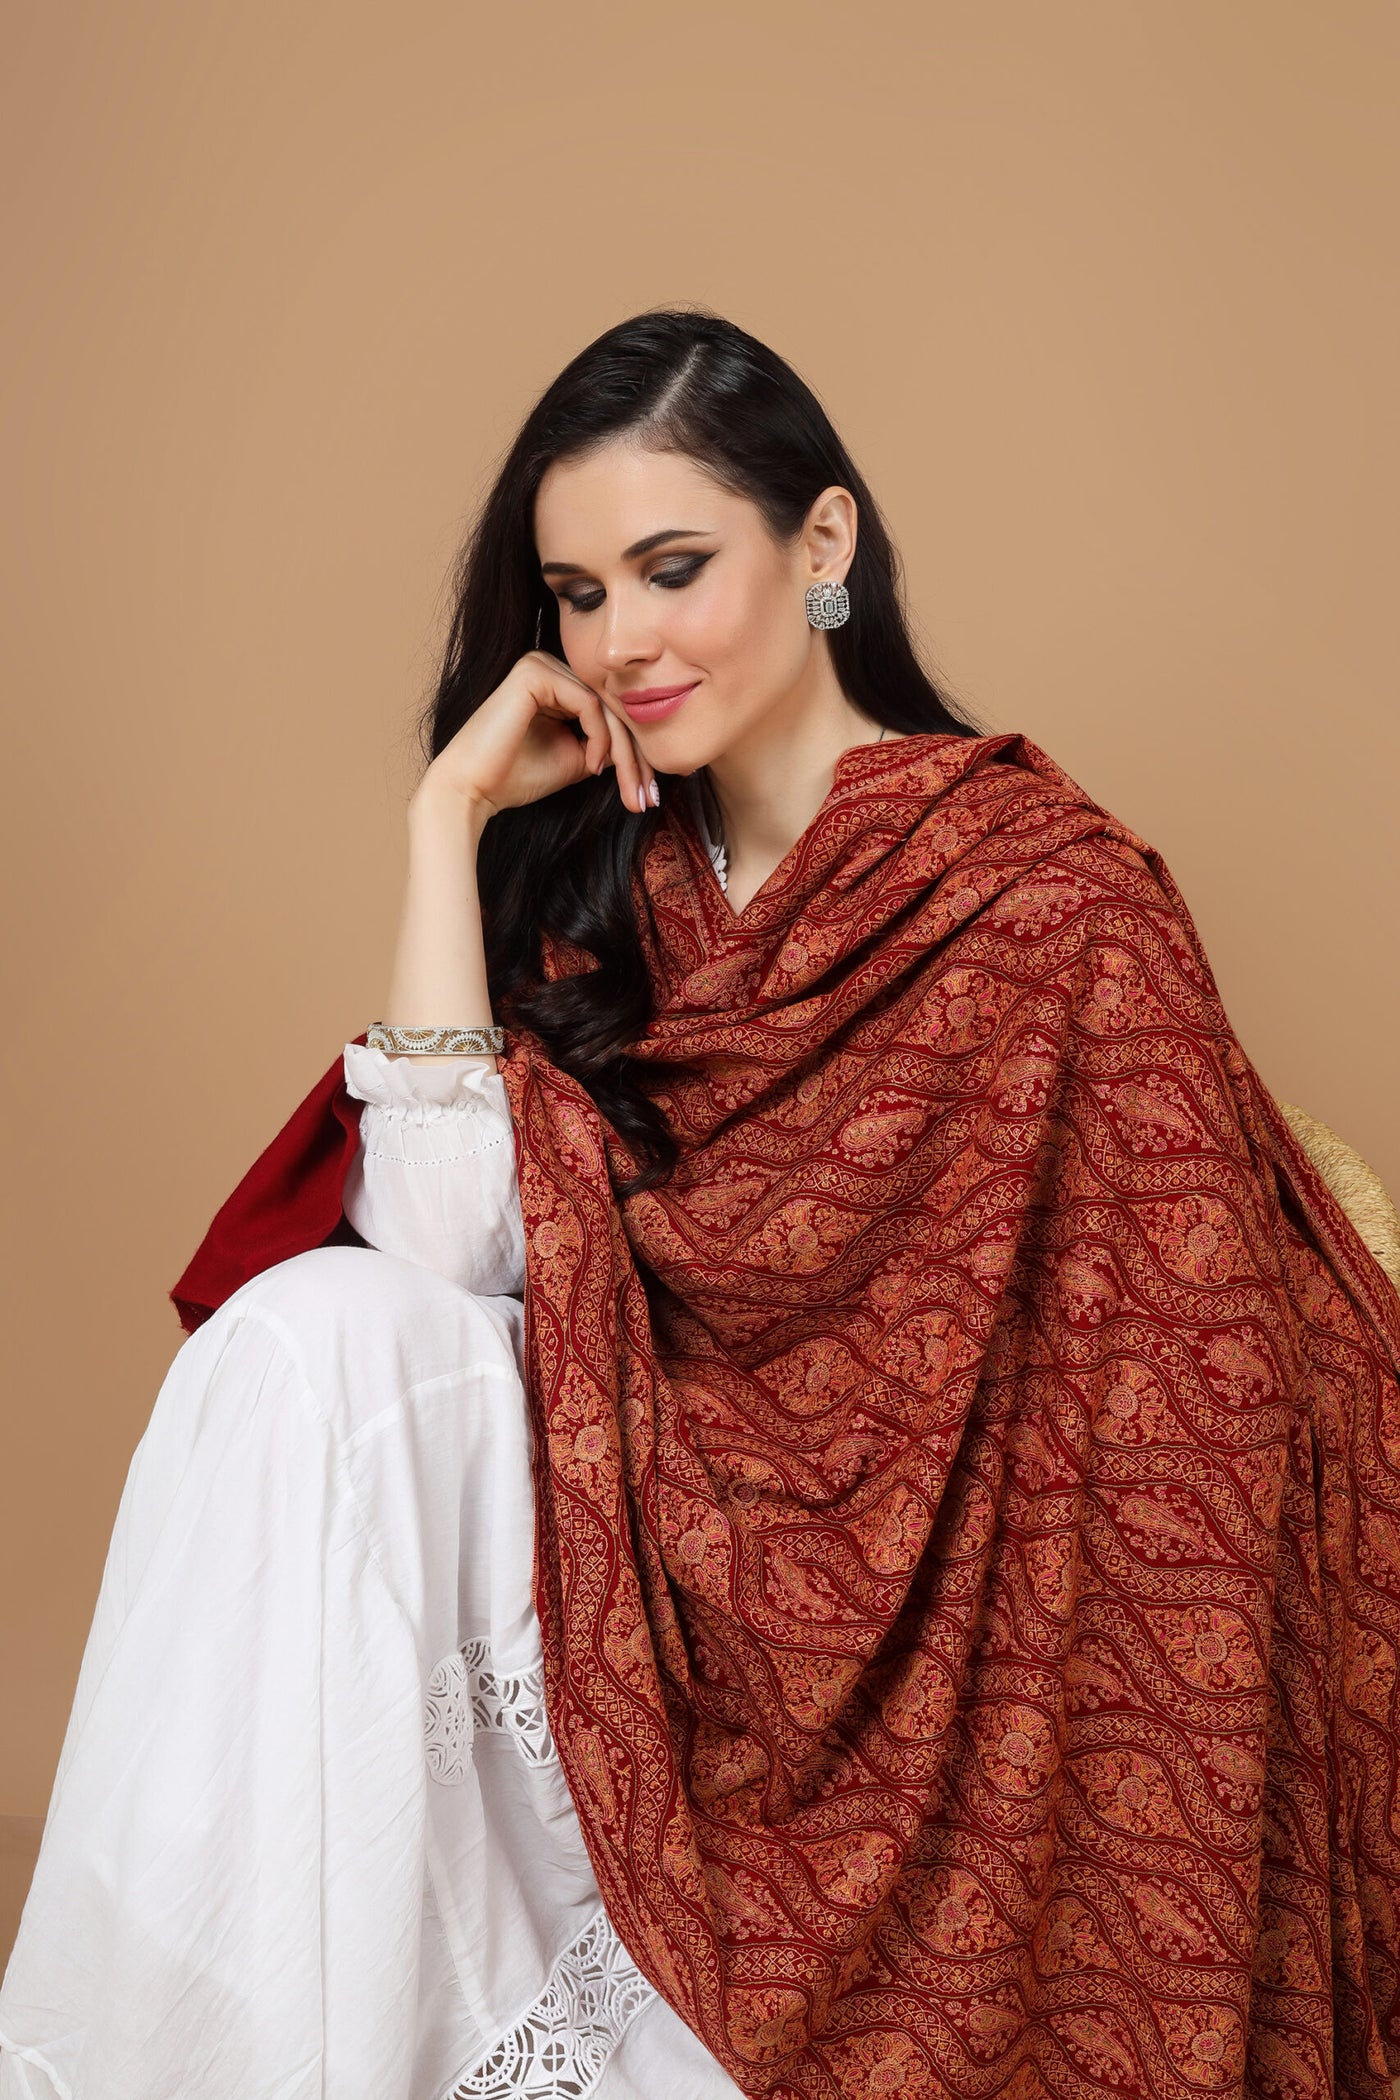 "PASHMINA SHAWL - A Statement of Elegance" bright Maroon colored Pashmina is featured by intricate Sozni across its surface. "PASHMINA SHAWLS IN ITALY . "KEPRA PASHMINA SHAWLS - For Those Who Seek Perfection"